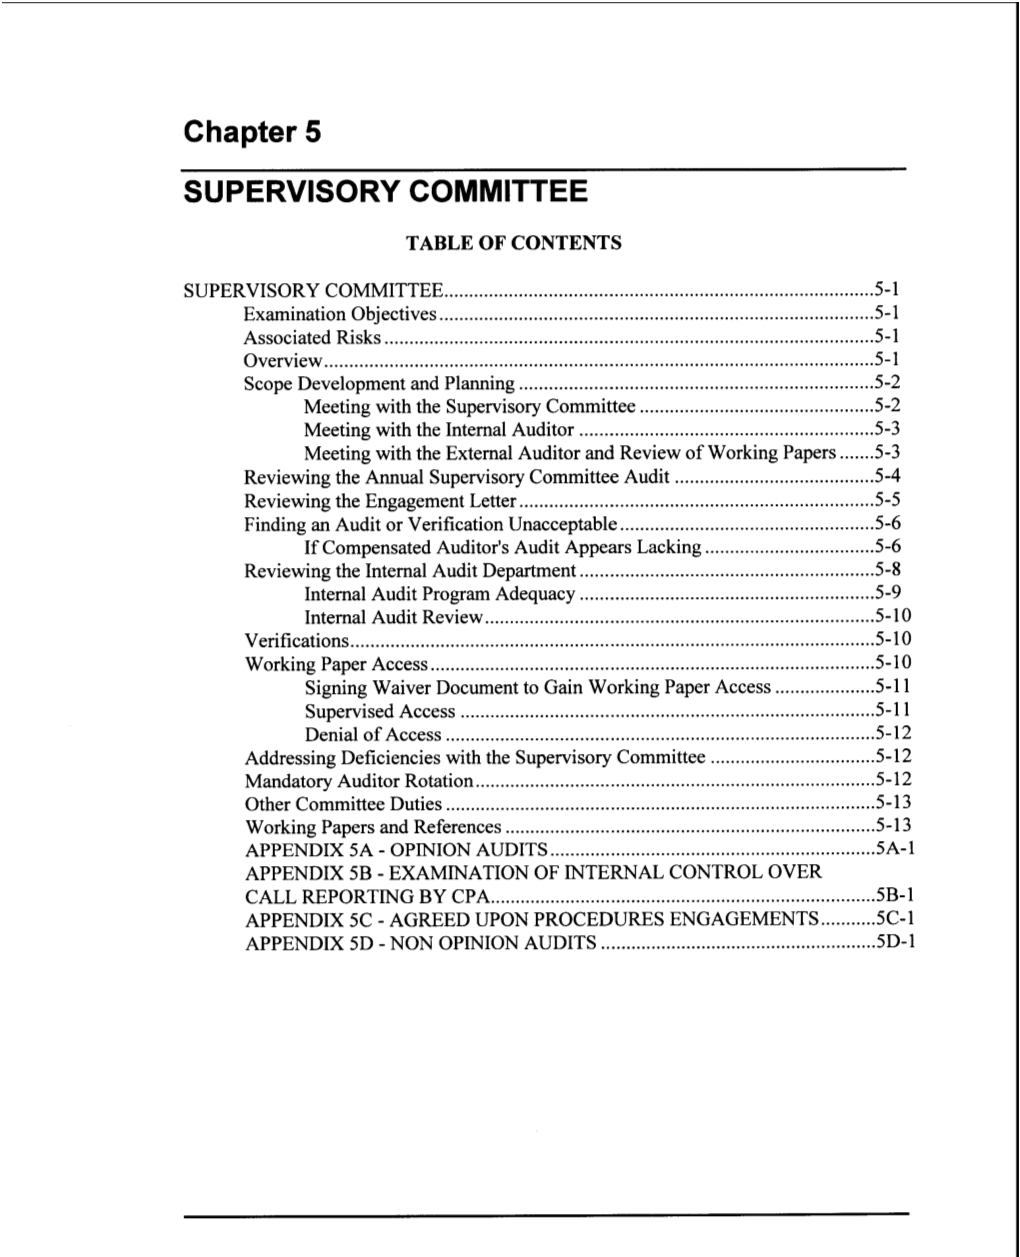 Chapter 5 SUPERVISORY COMMITTEE